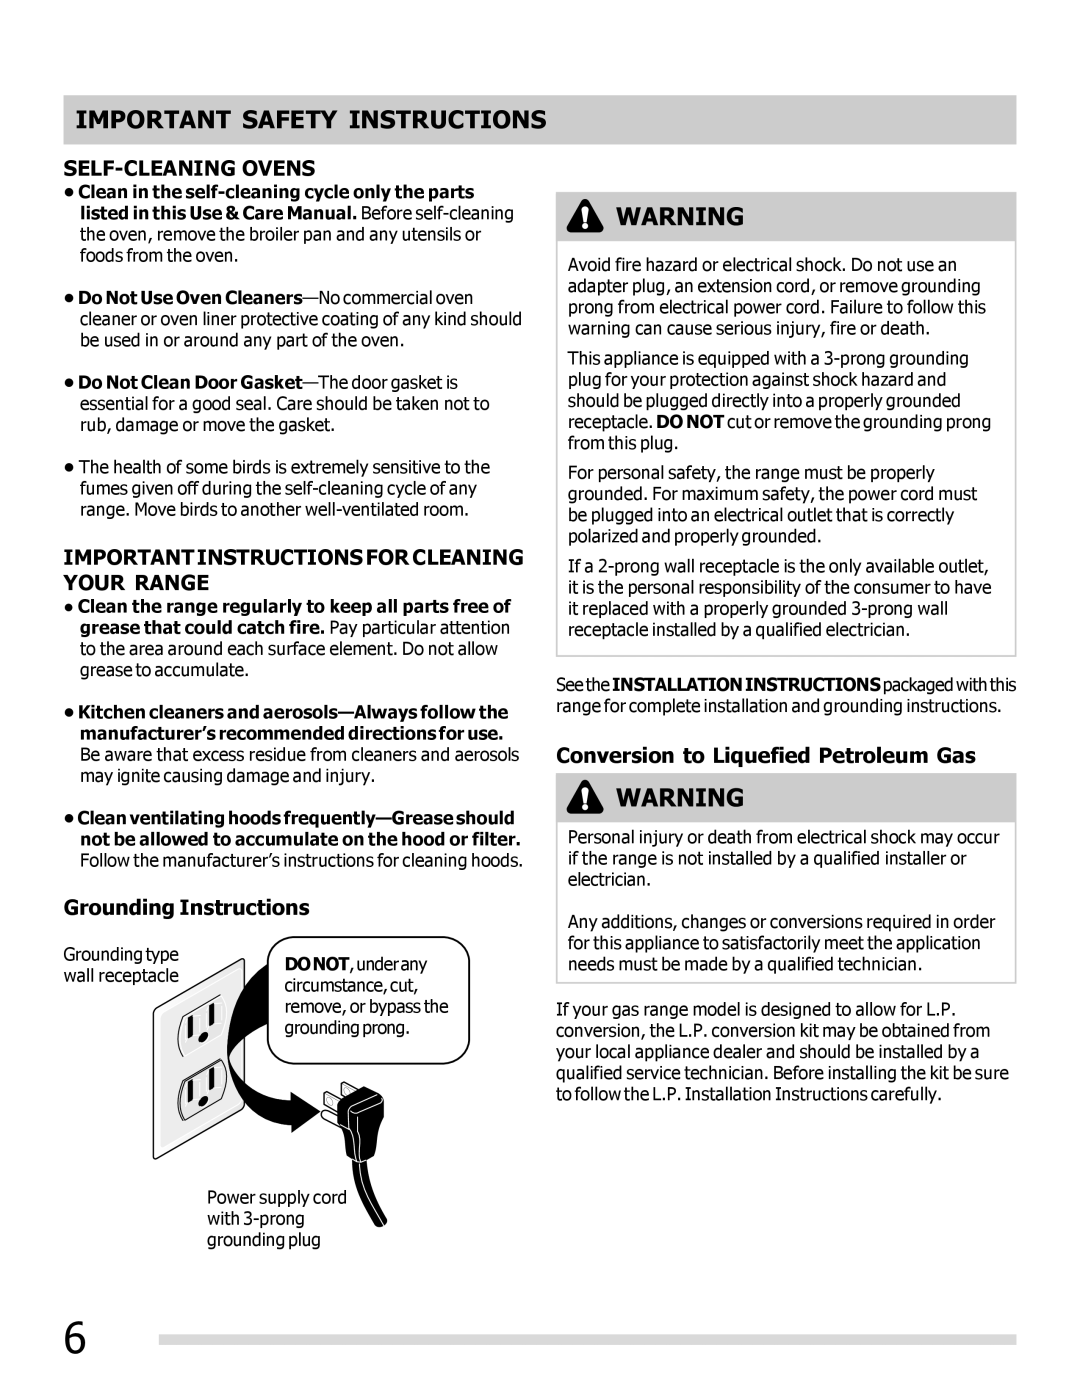 Frigidaire 316901300 Self-Cleaningovens, Important Instructions For Cleaning Your Range, Grounding Instructions 